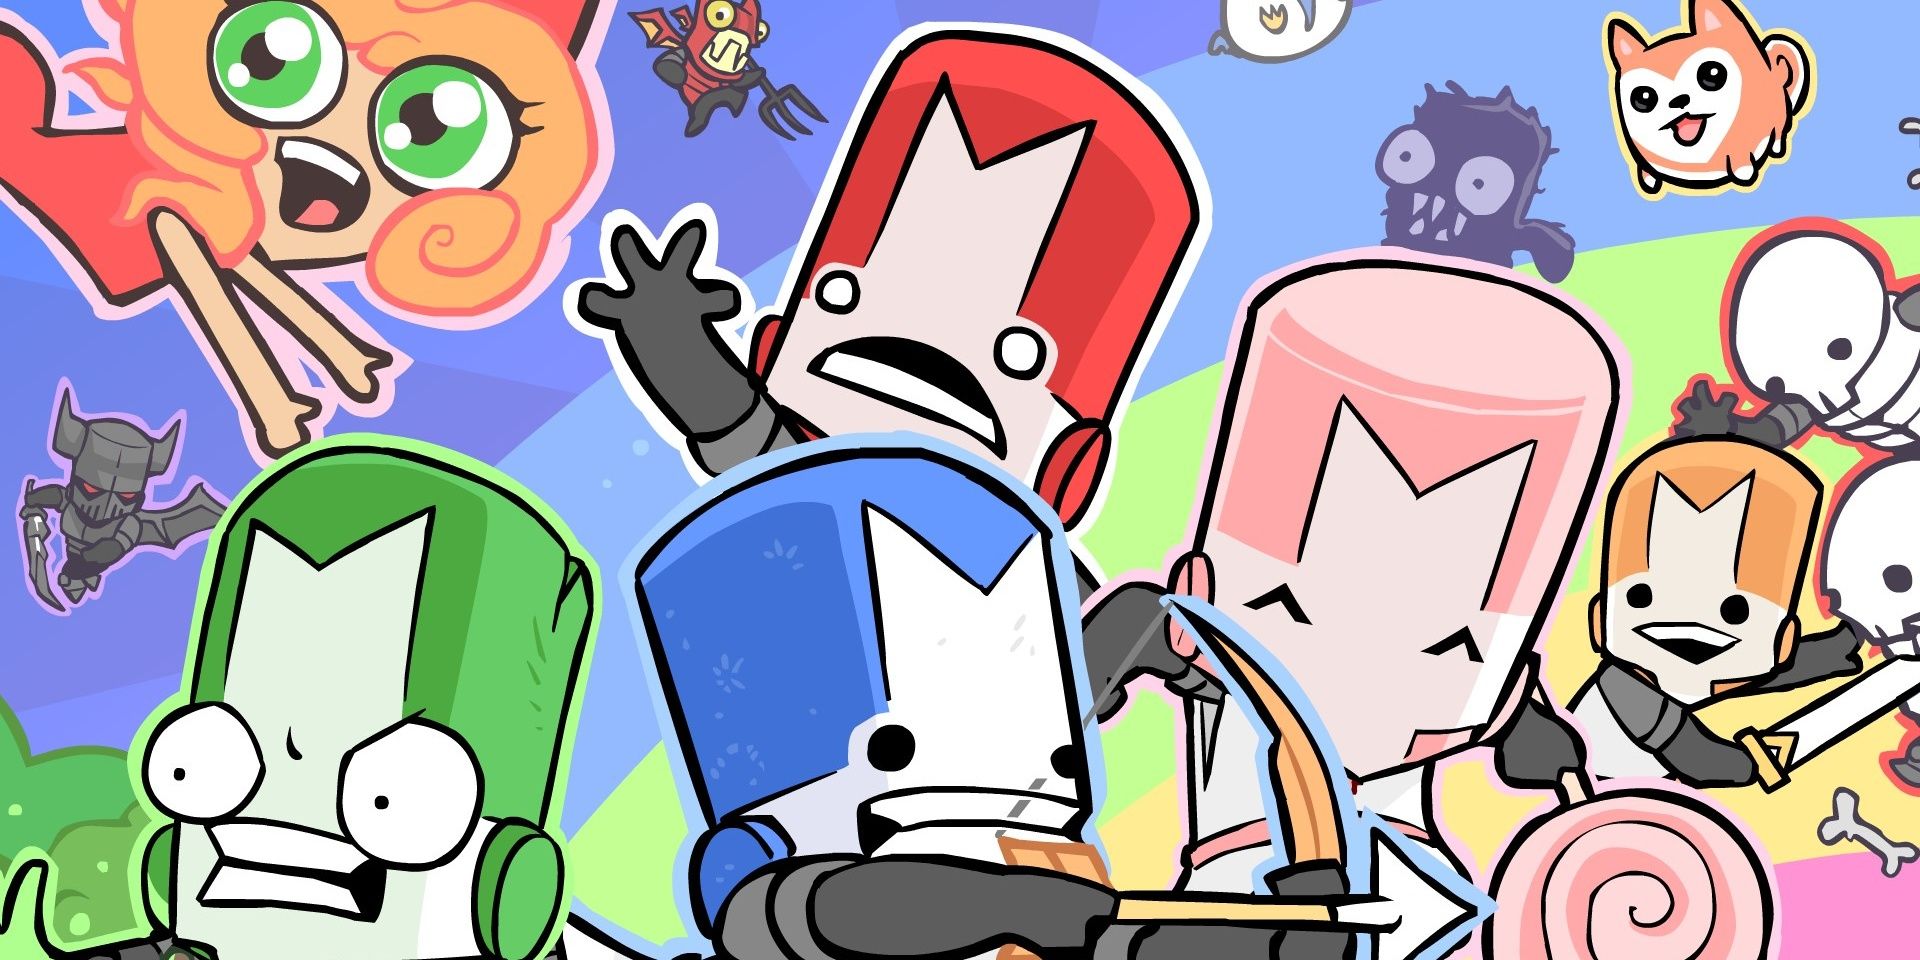 Castle Crashers - The Blue, Green, Pink, And Red Knights Surrounded By The Rest Of The Cast